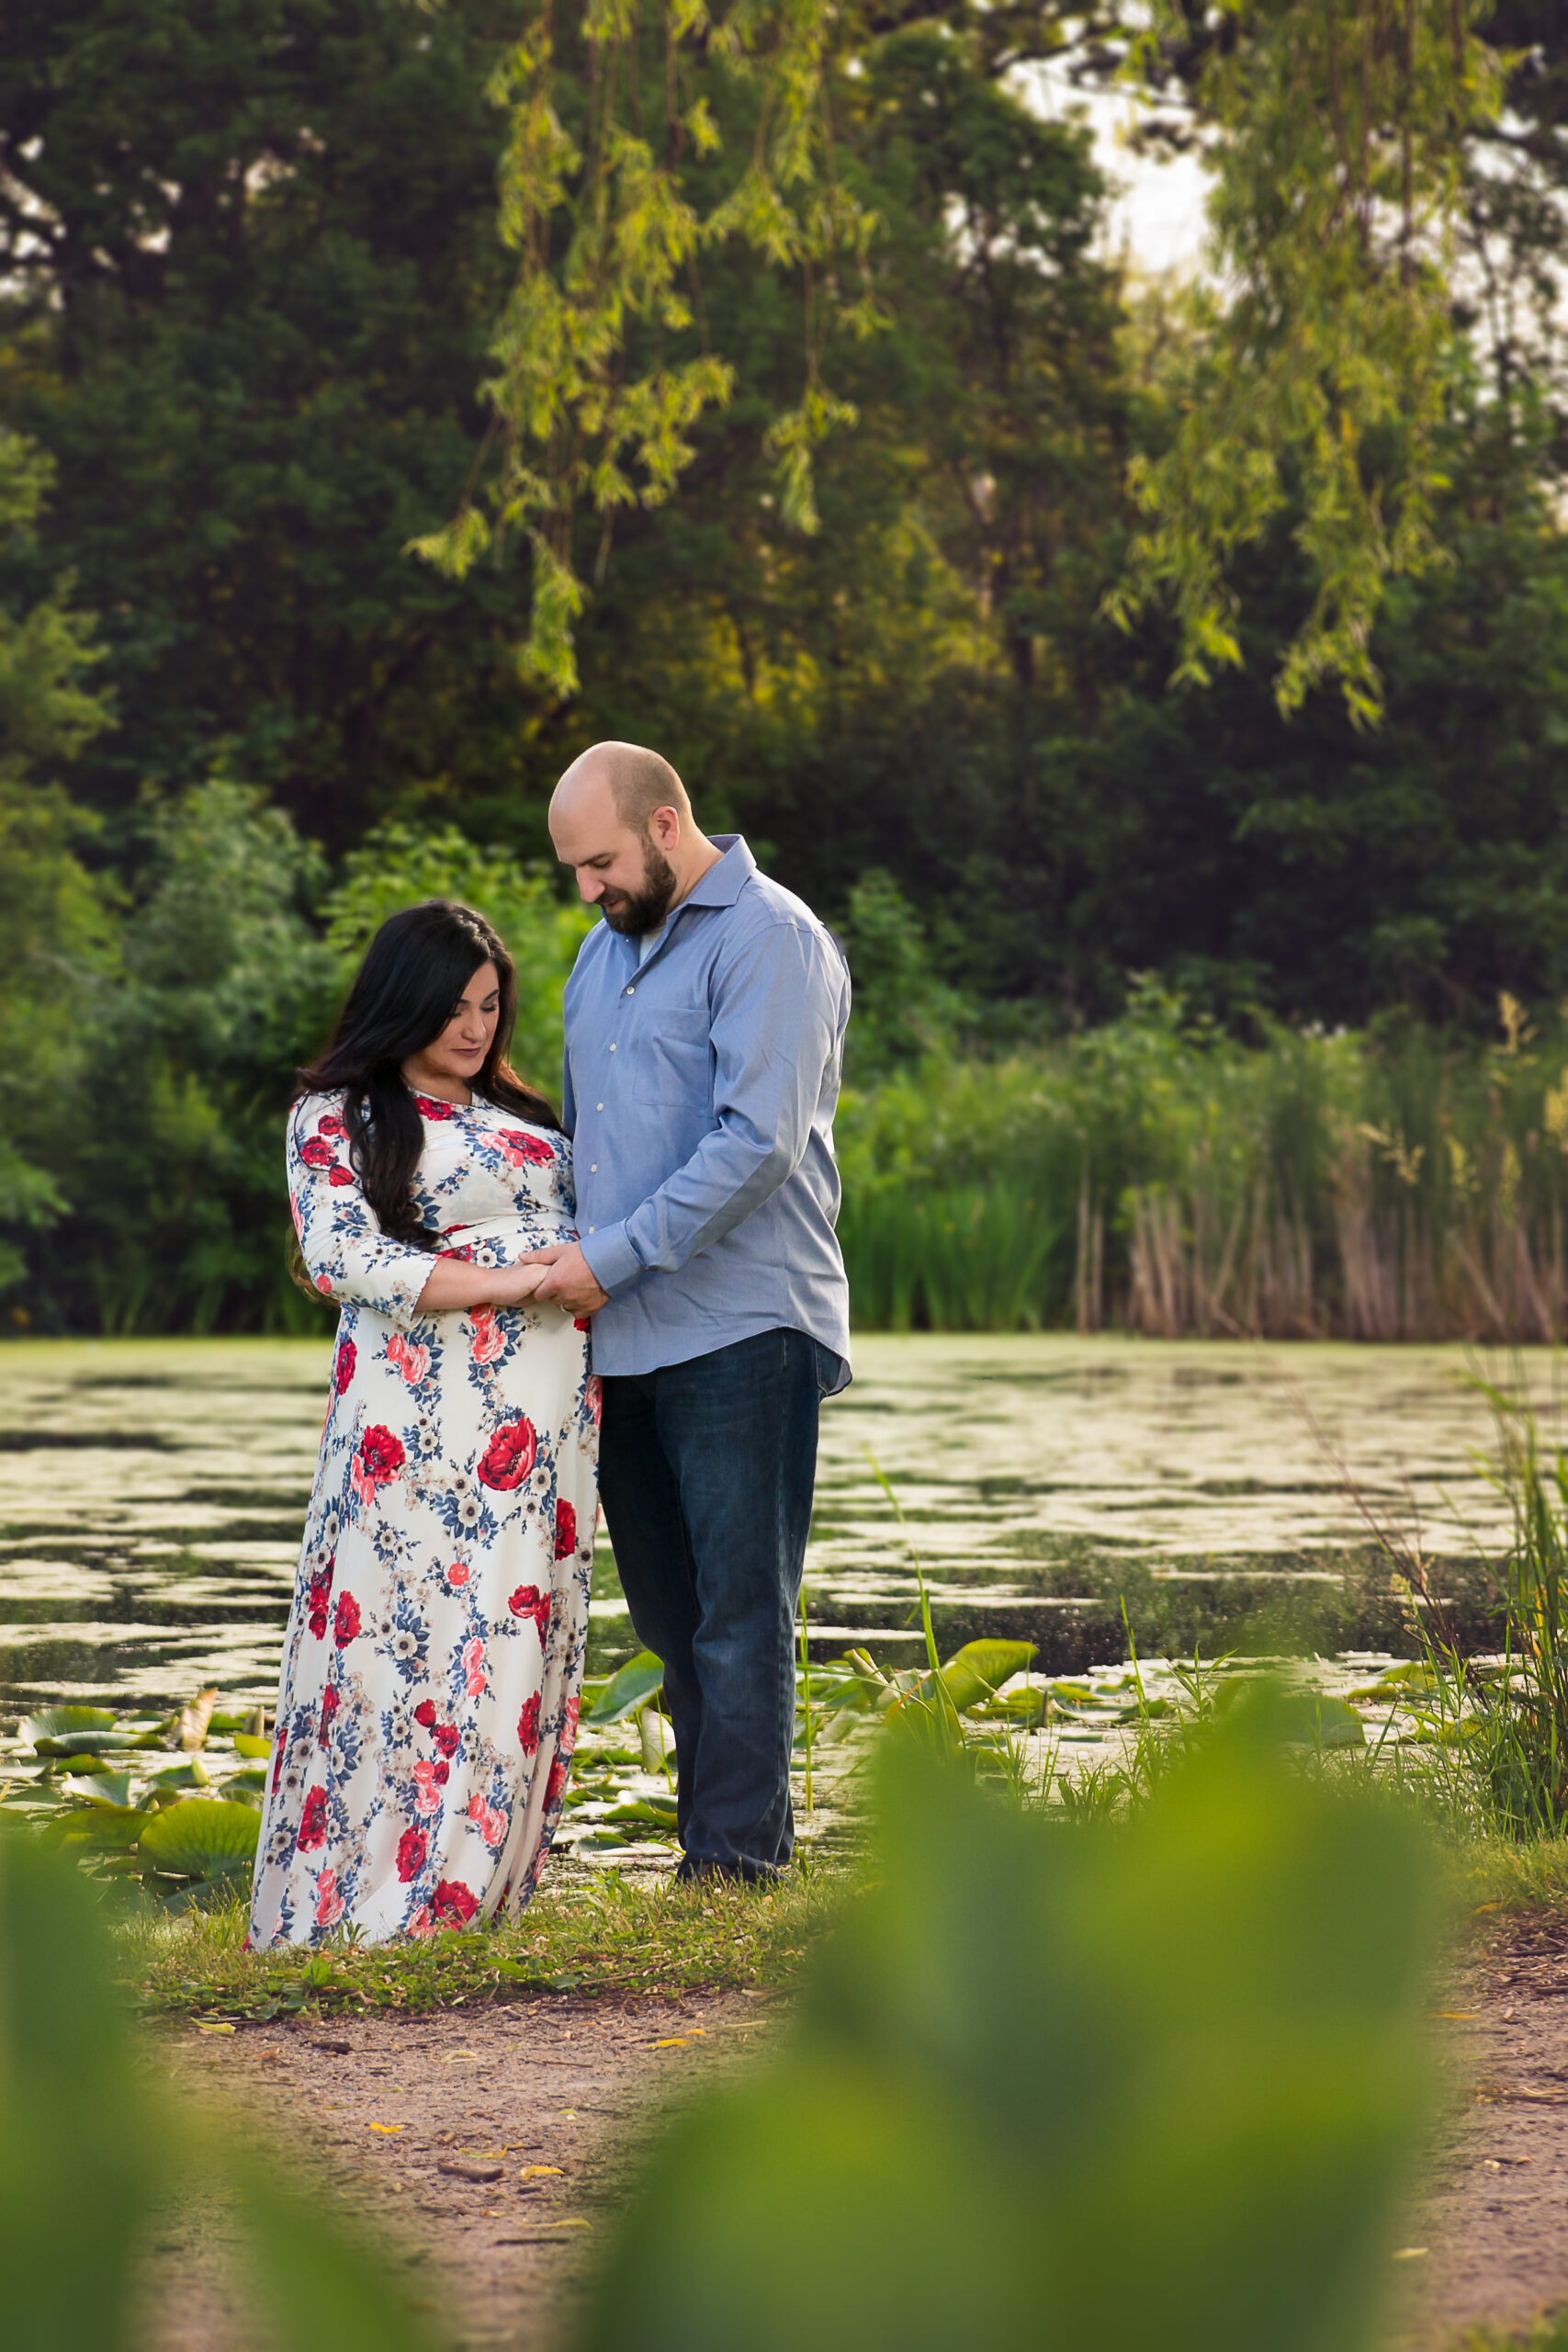 on location, family session, Ingleside, illinois, Casi Ann Photography, Photographer, Lake County, McHenry County, IL, Child, Familly, Photography, Casi Ann Photography, Photographer, Lake County, McHenry County, IL, Child, Familly, Photography, Session, maternity